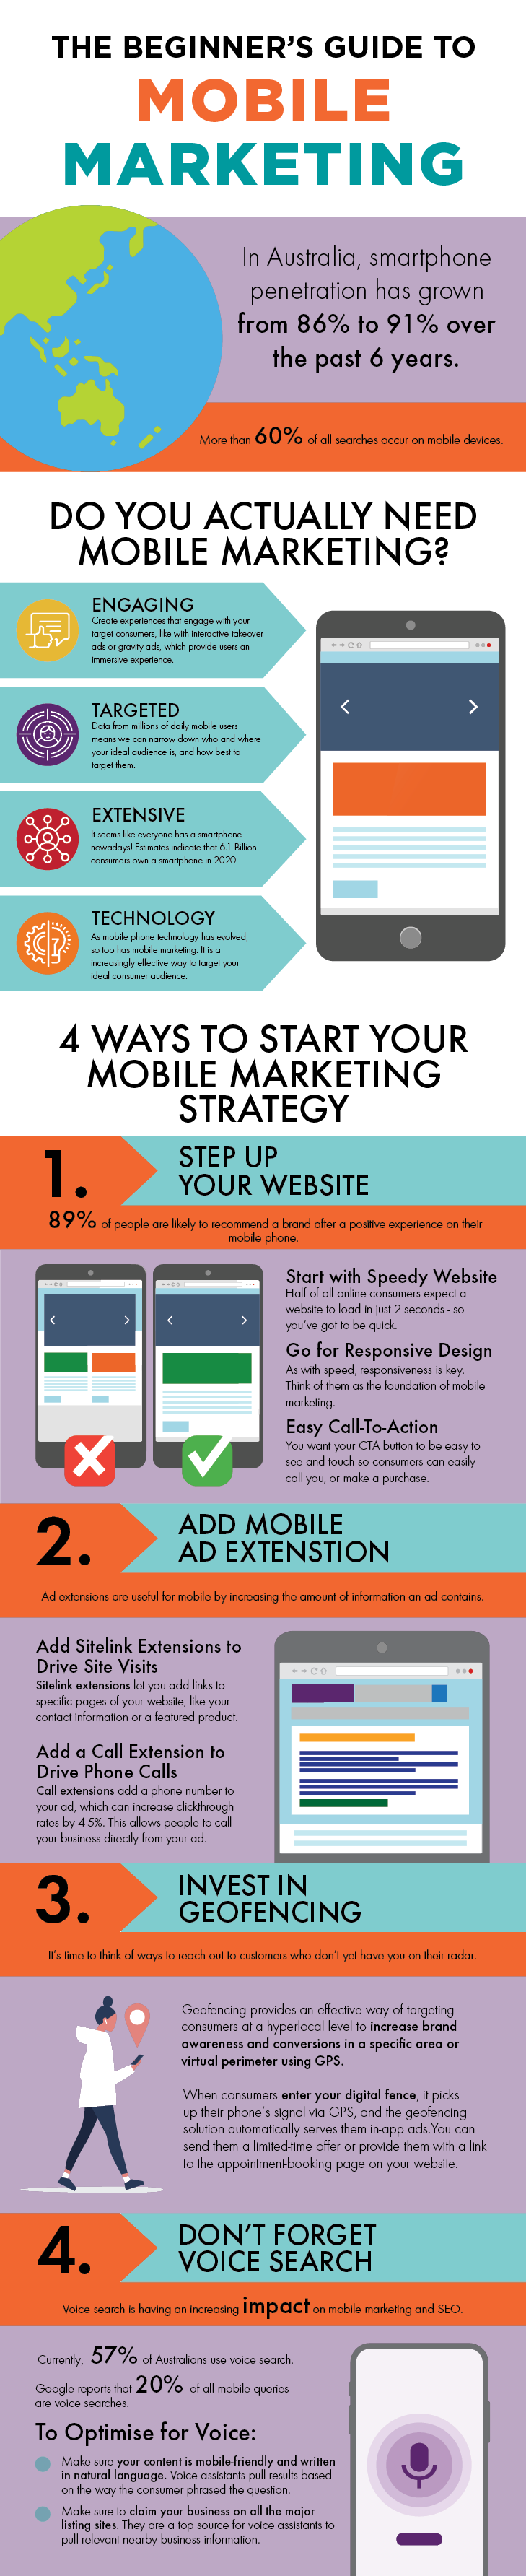 The Beginner’s Guide to Mobile Marketing